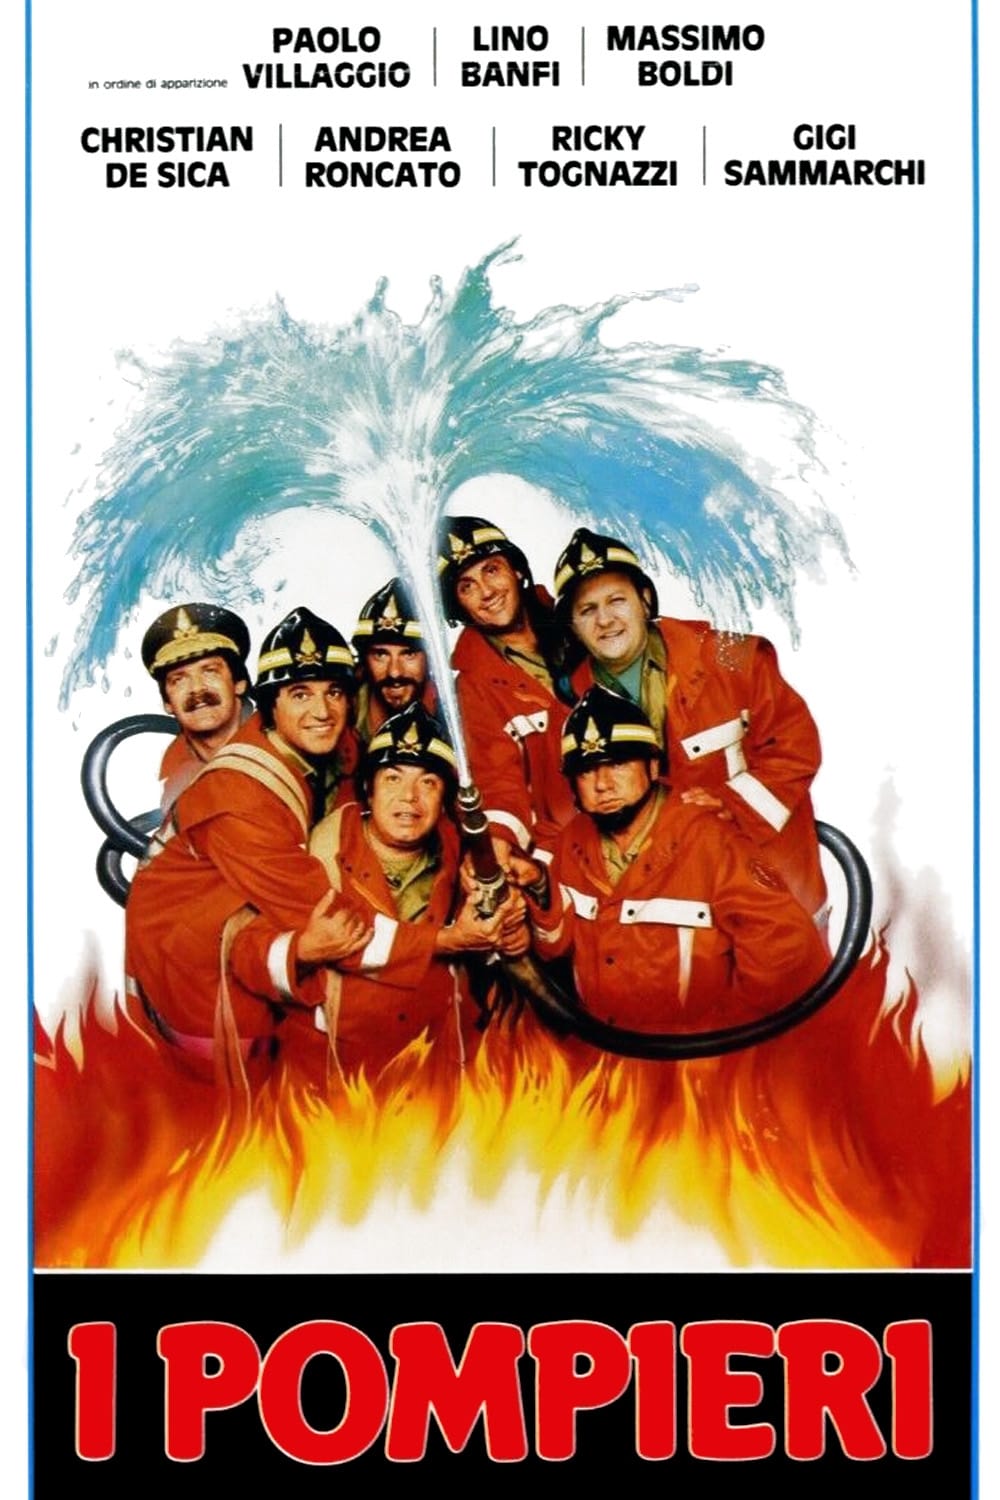 Firefighters (1985)